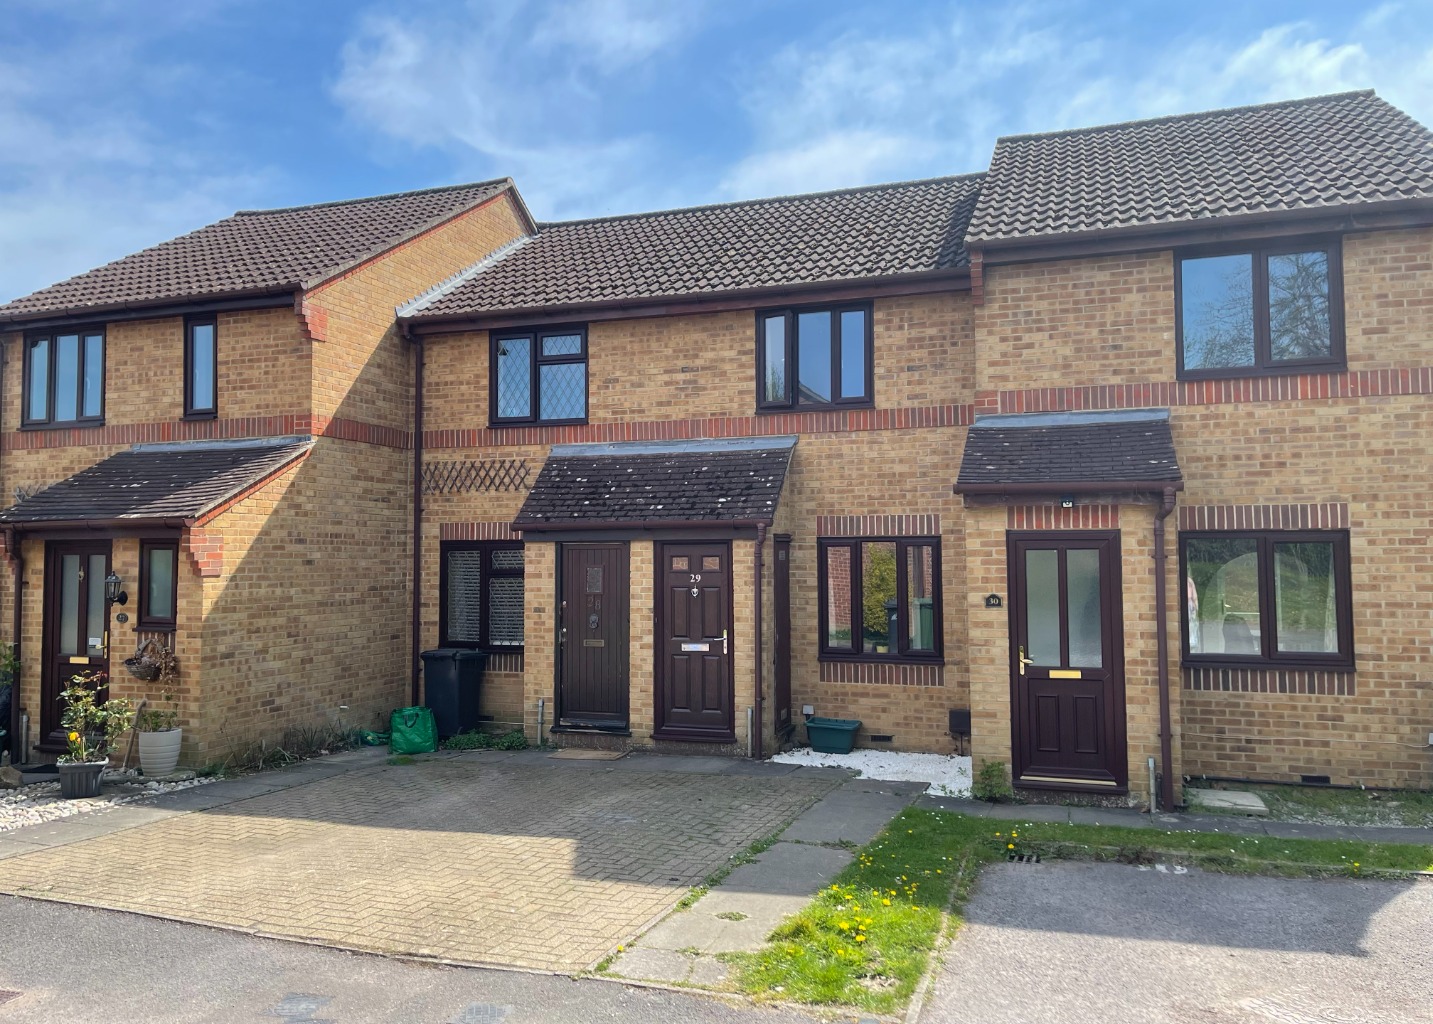 A well presented two bedroom home with driveway parking directly outside. Internally has a welcome hall opening through to the living room with a staircase that leads up to two bedrooms, and a modern bathroom. Bedroom one has a in built cupboard as well as a fitted wardrobe and cabinet suite.